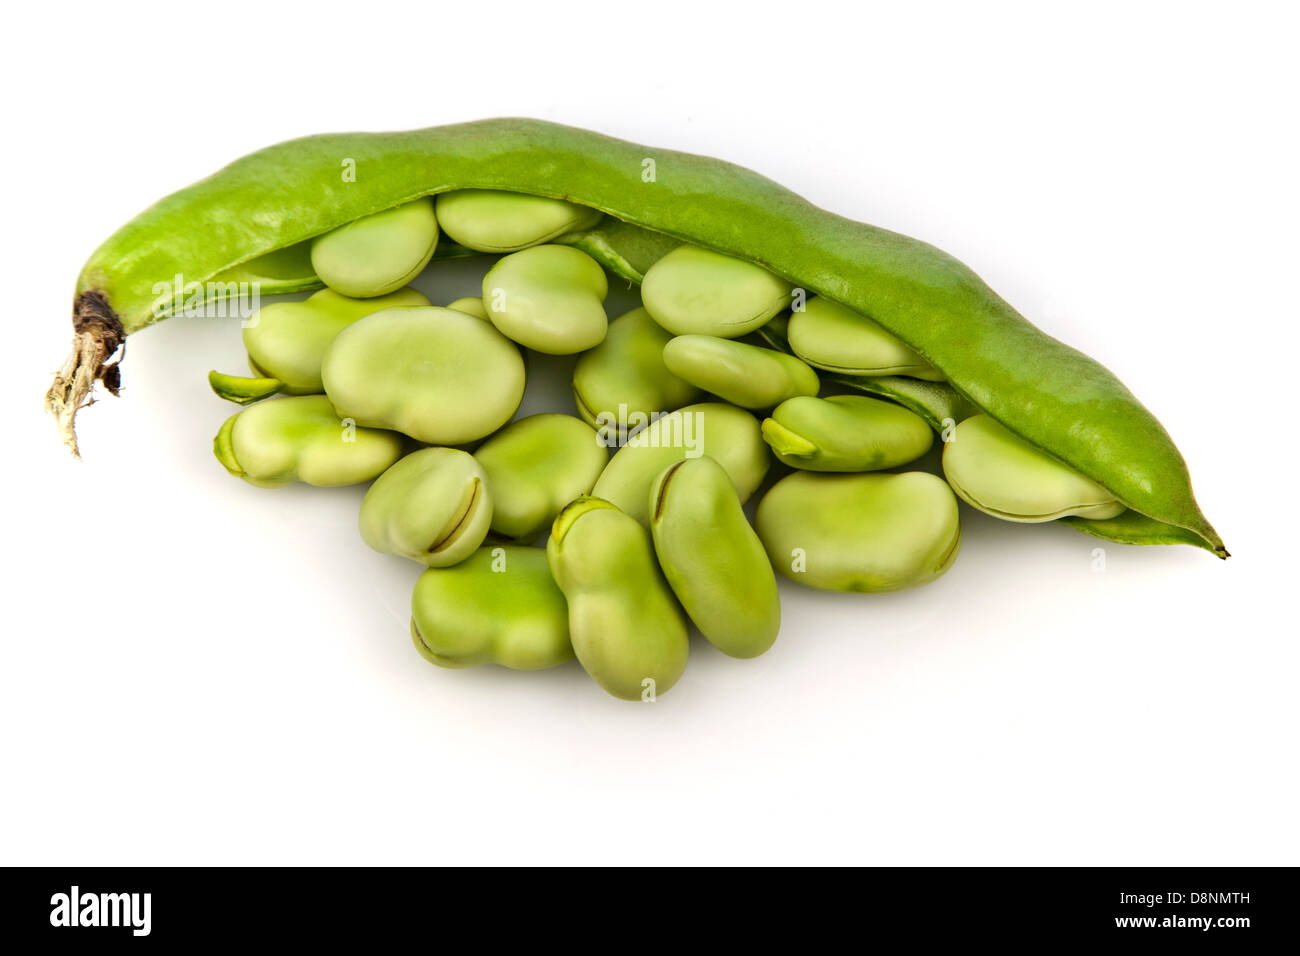 Broad Beans Stock Photo